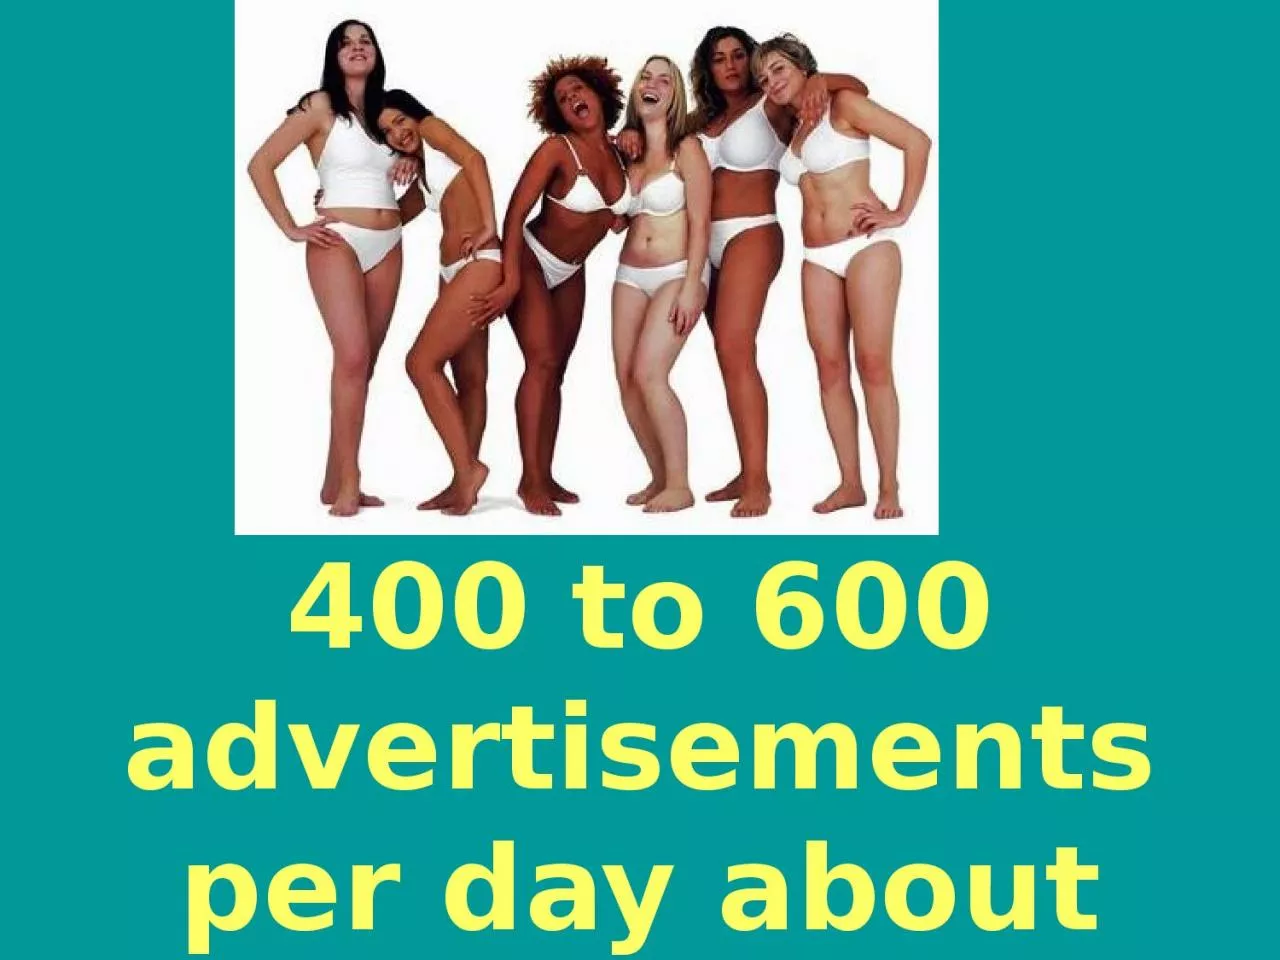 400 to 600 advertisements per day about body image or weight